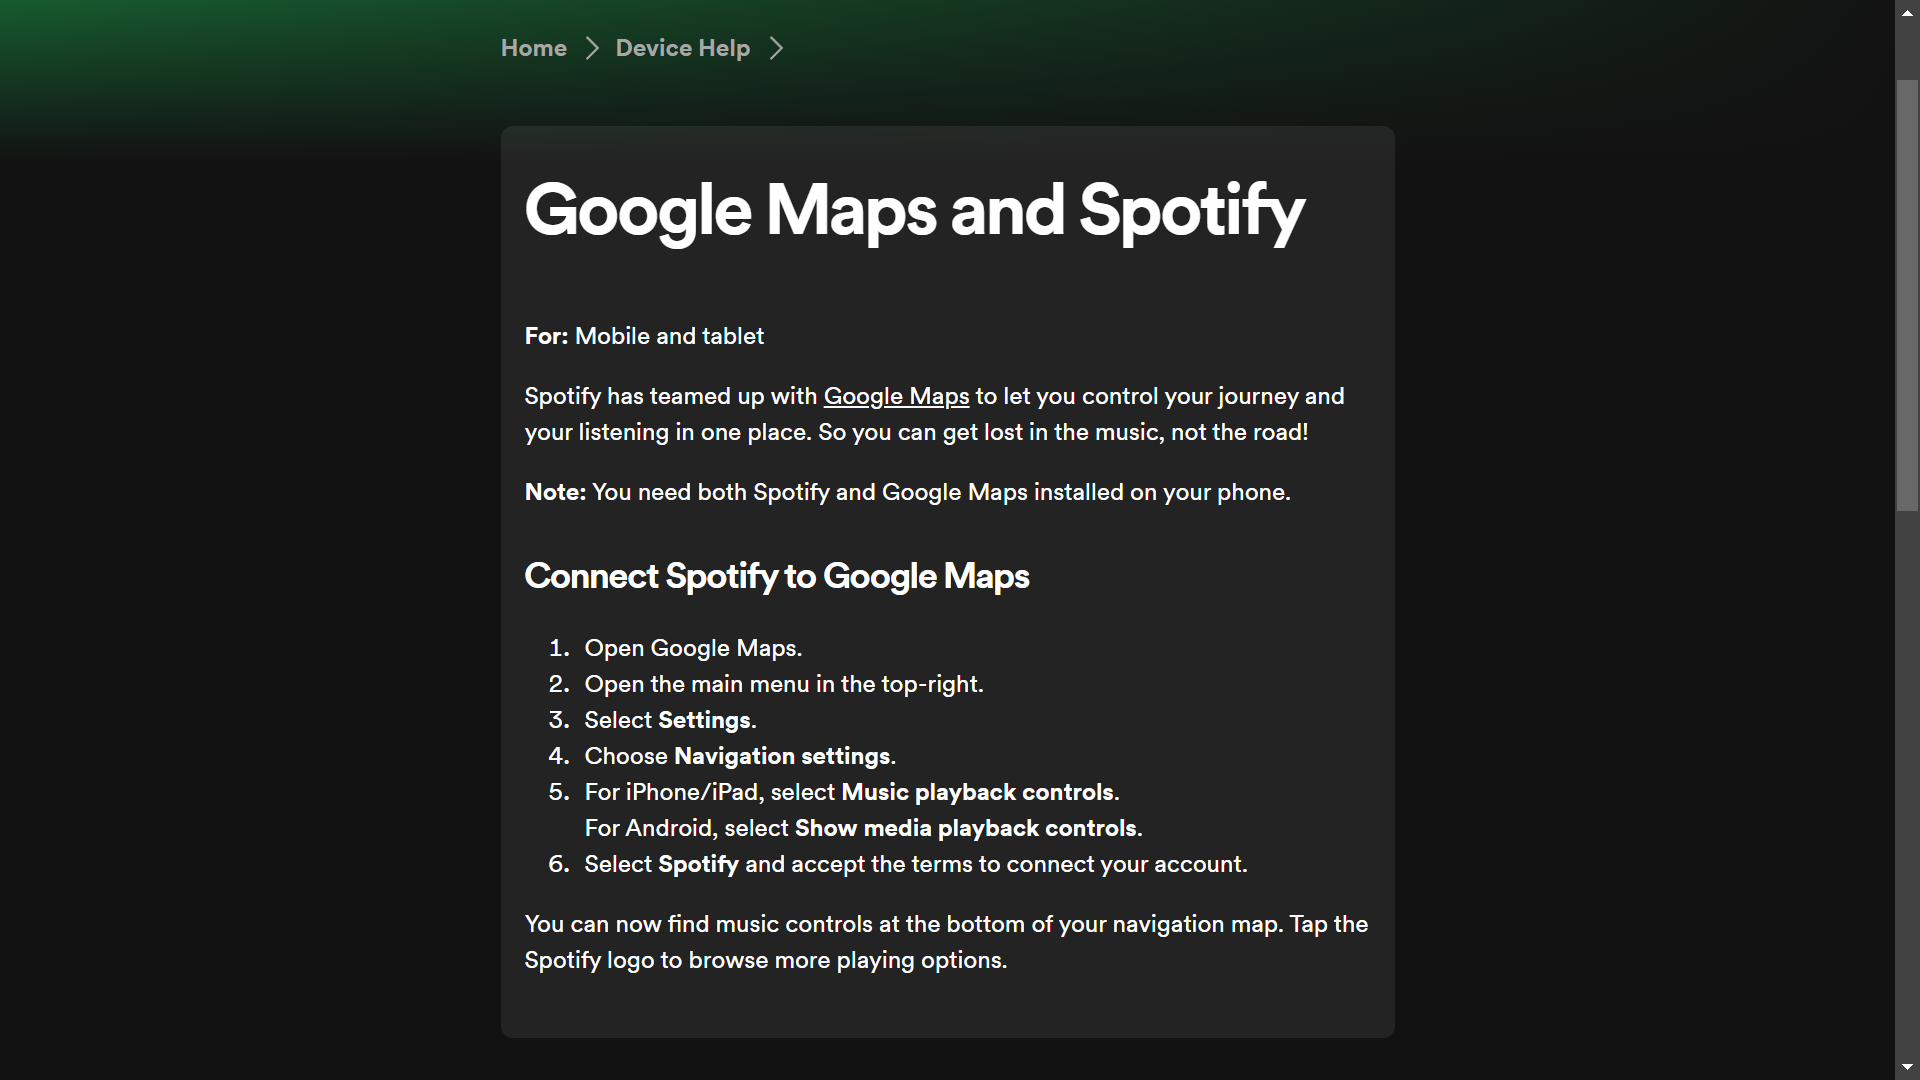 Scnreeshot of Help Guide by Spotify on using their app while using Google Maps